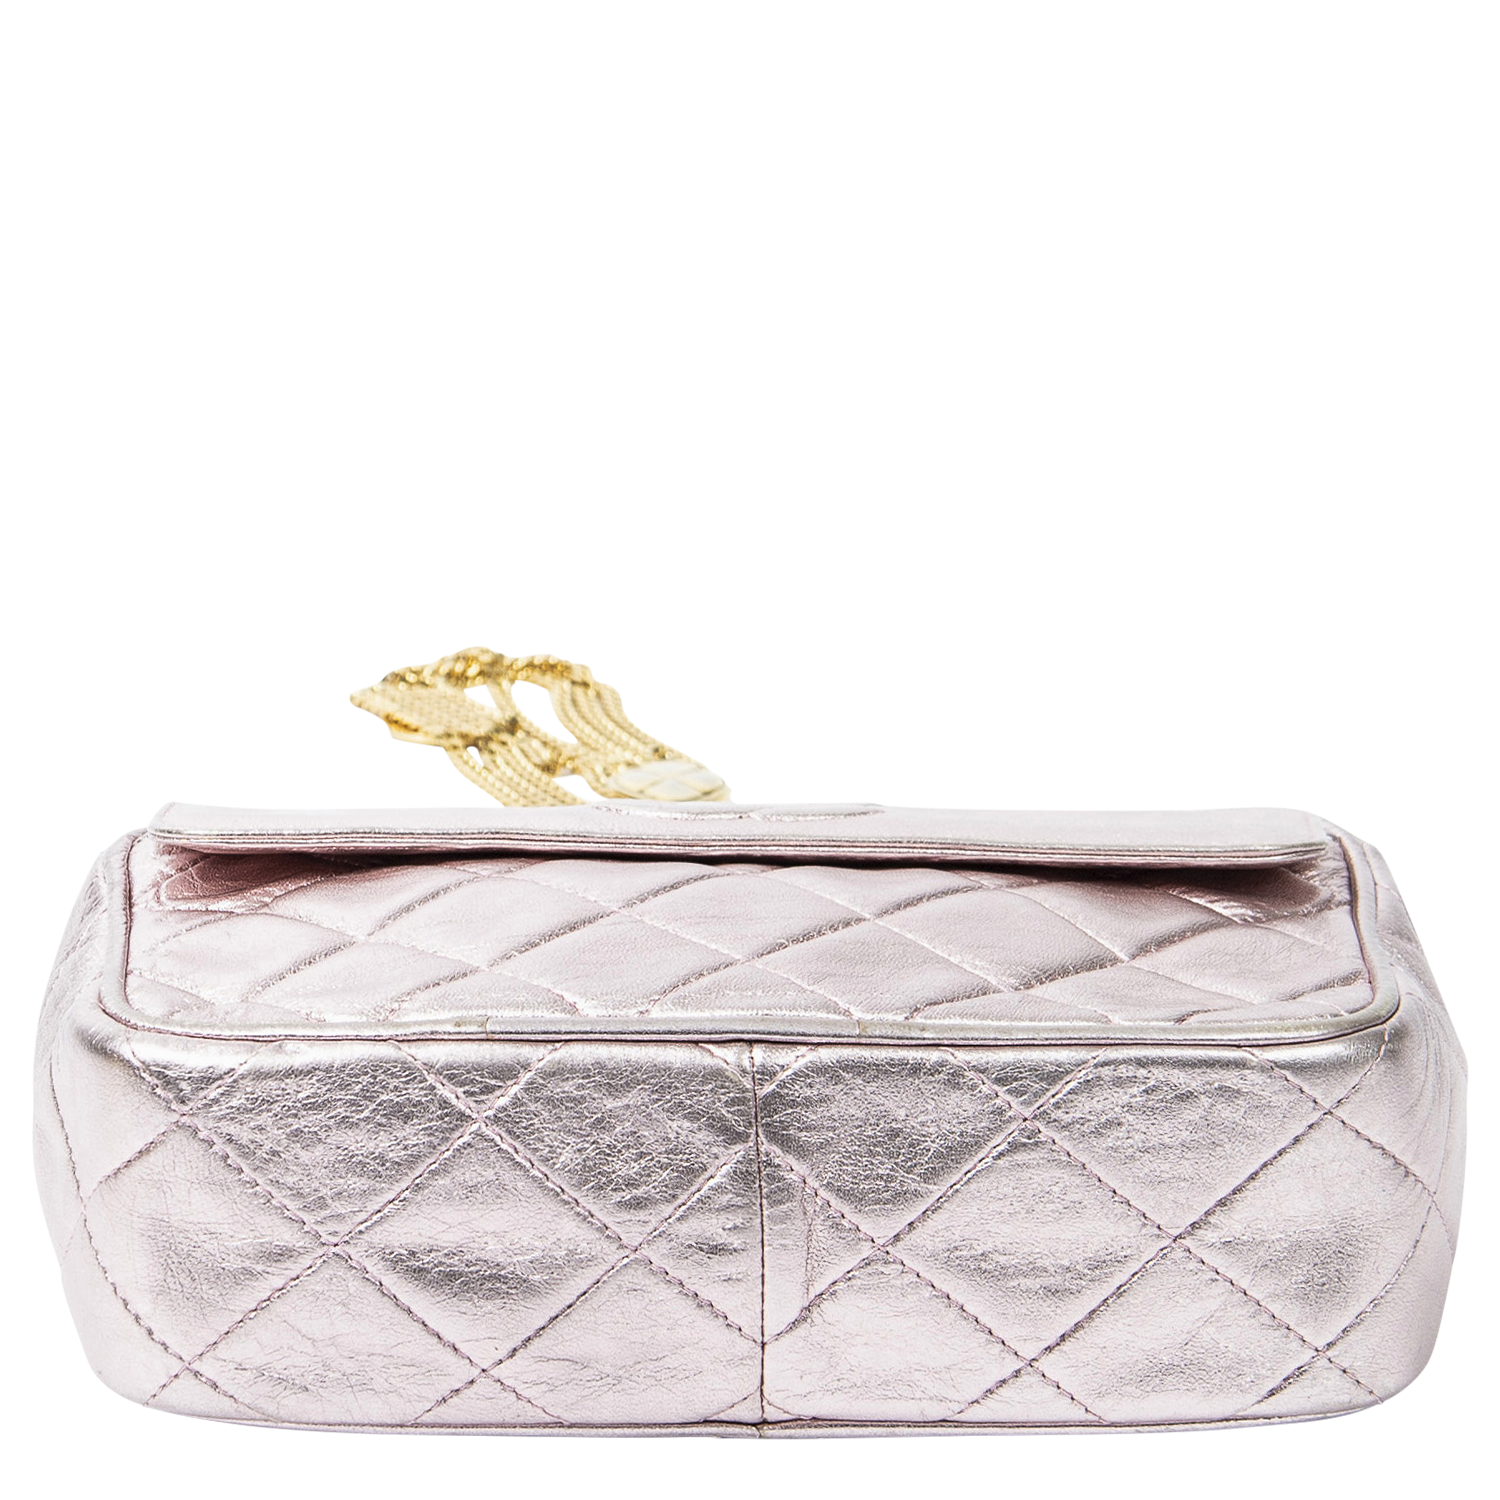 Chanel Pink Quilted Lambskin Leather Small Tassel Chain Camera Bag